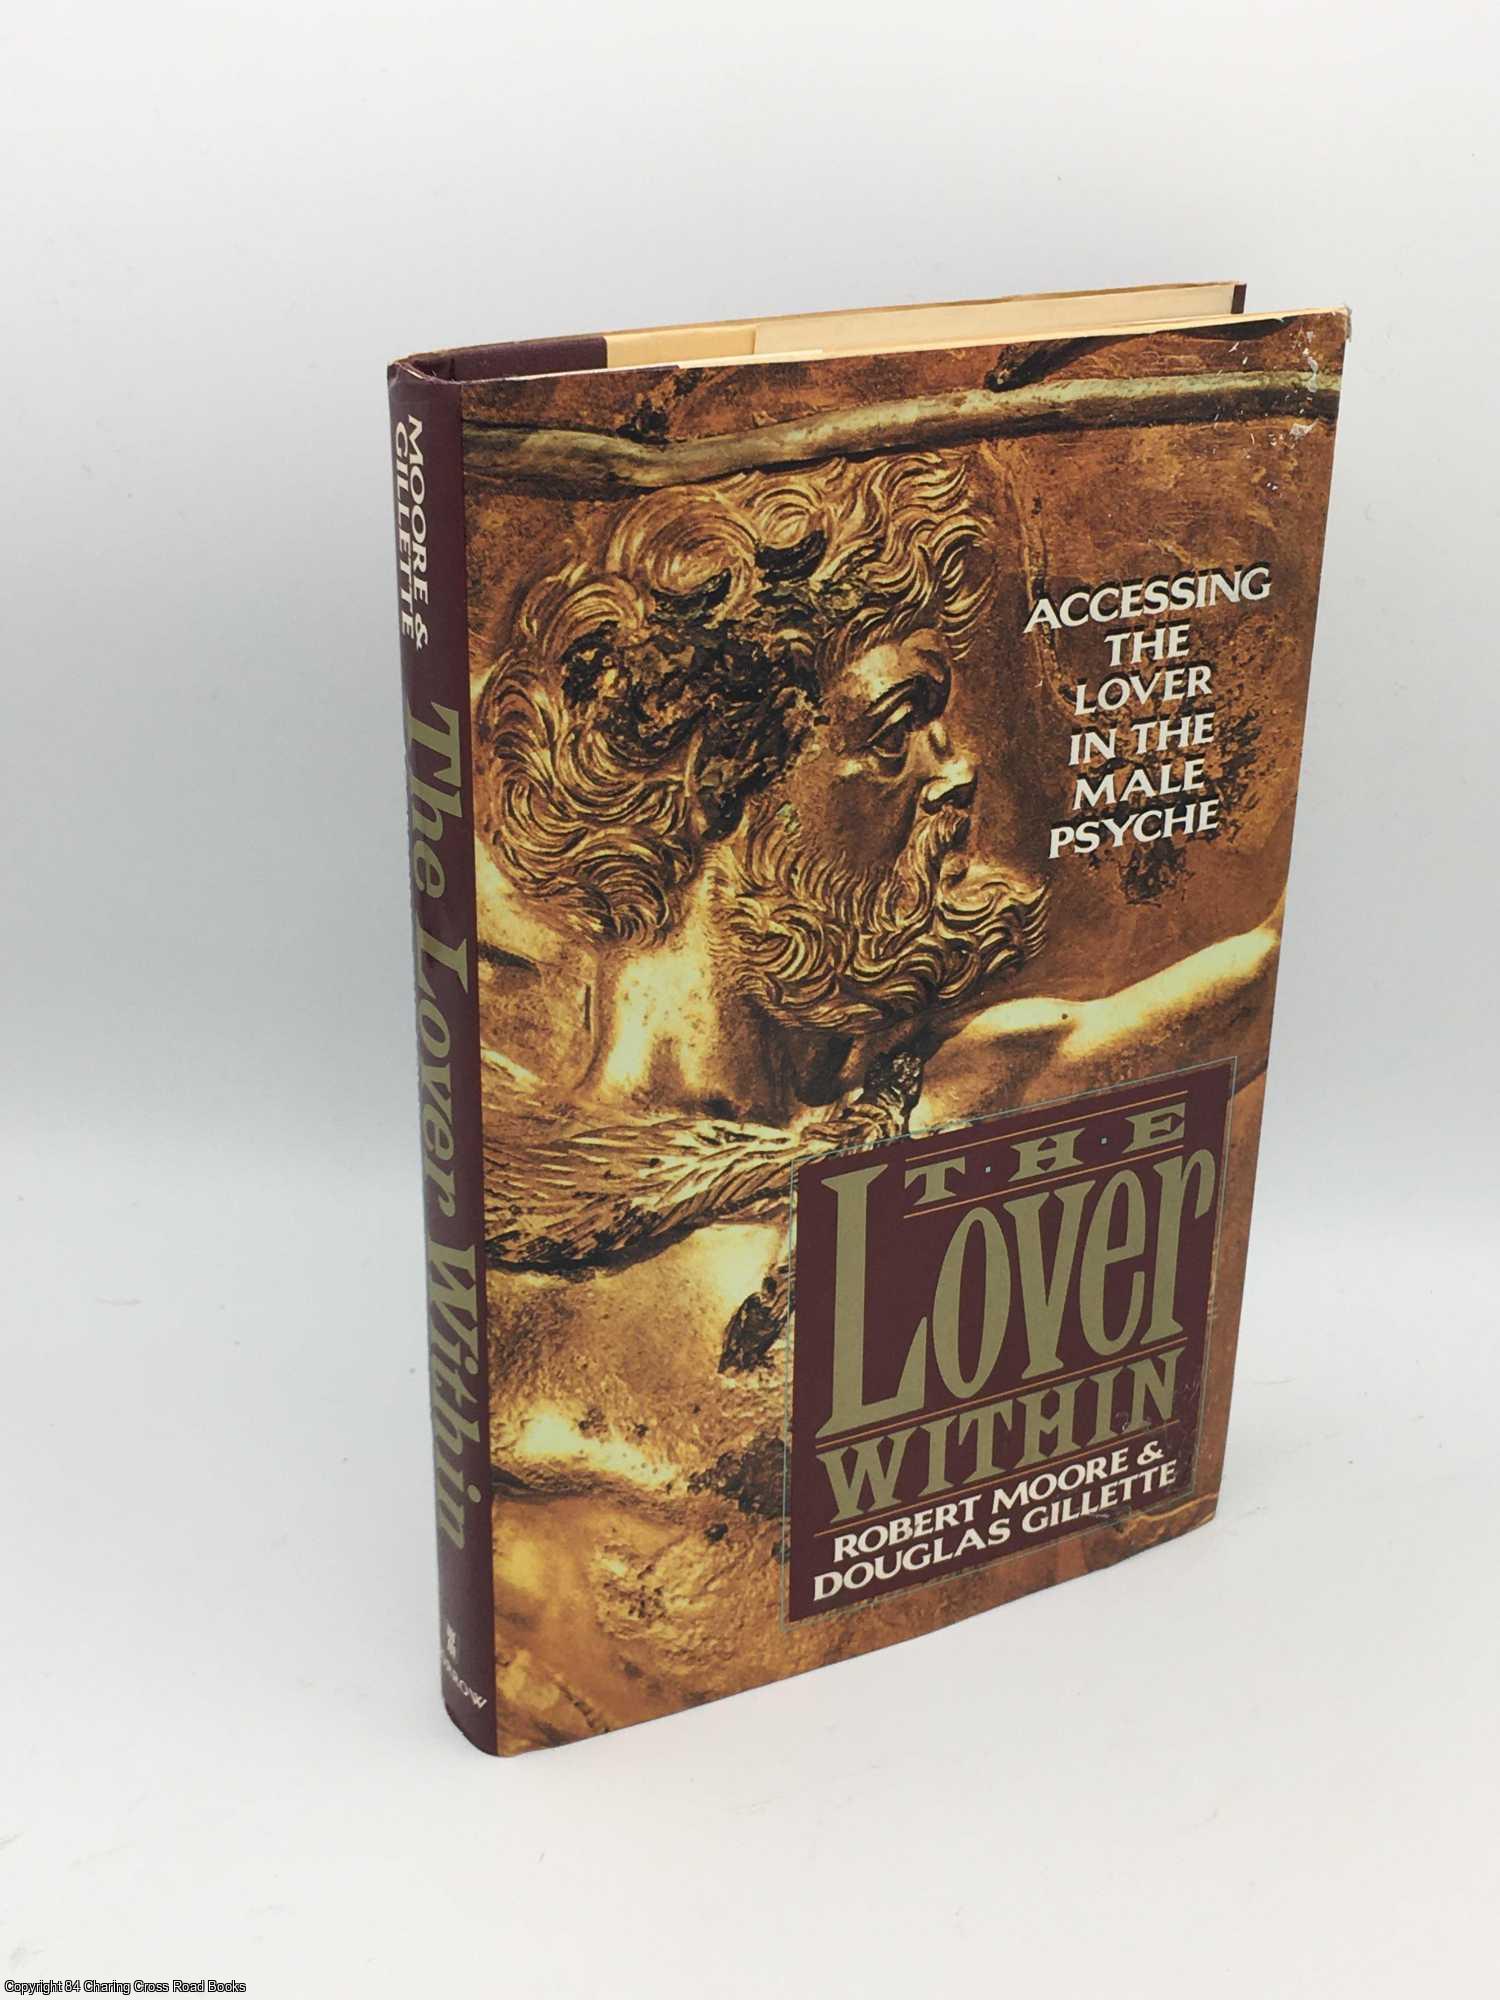 Moore, Robert, Gillette, Douglas - The Lover Within: Accessing the Lover in the Male Psyche